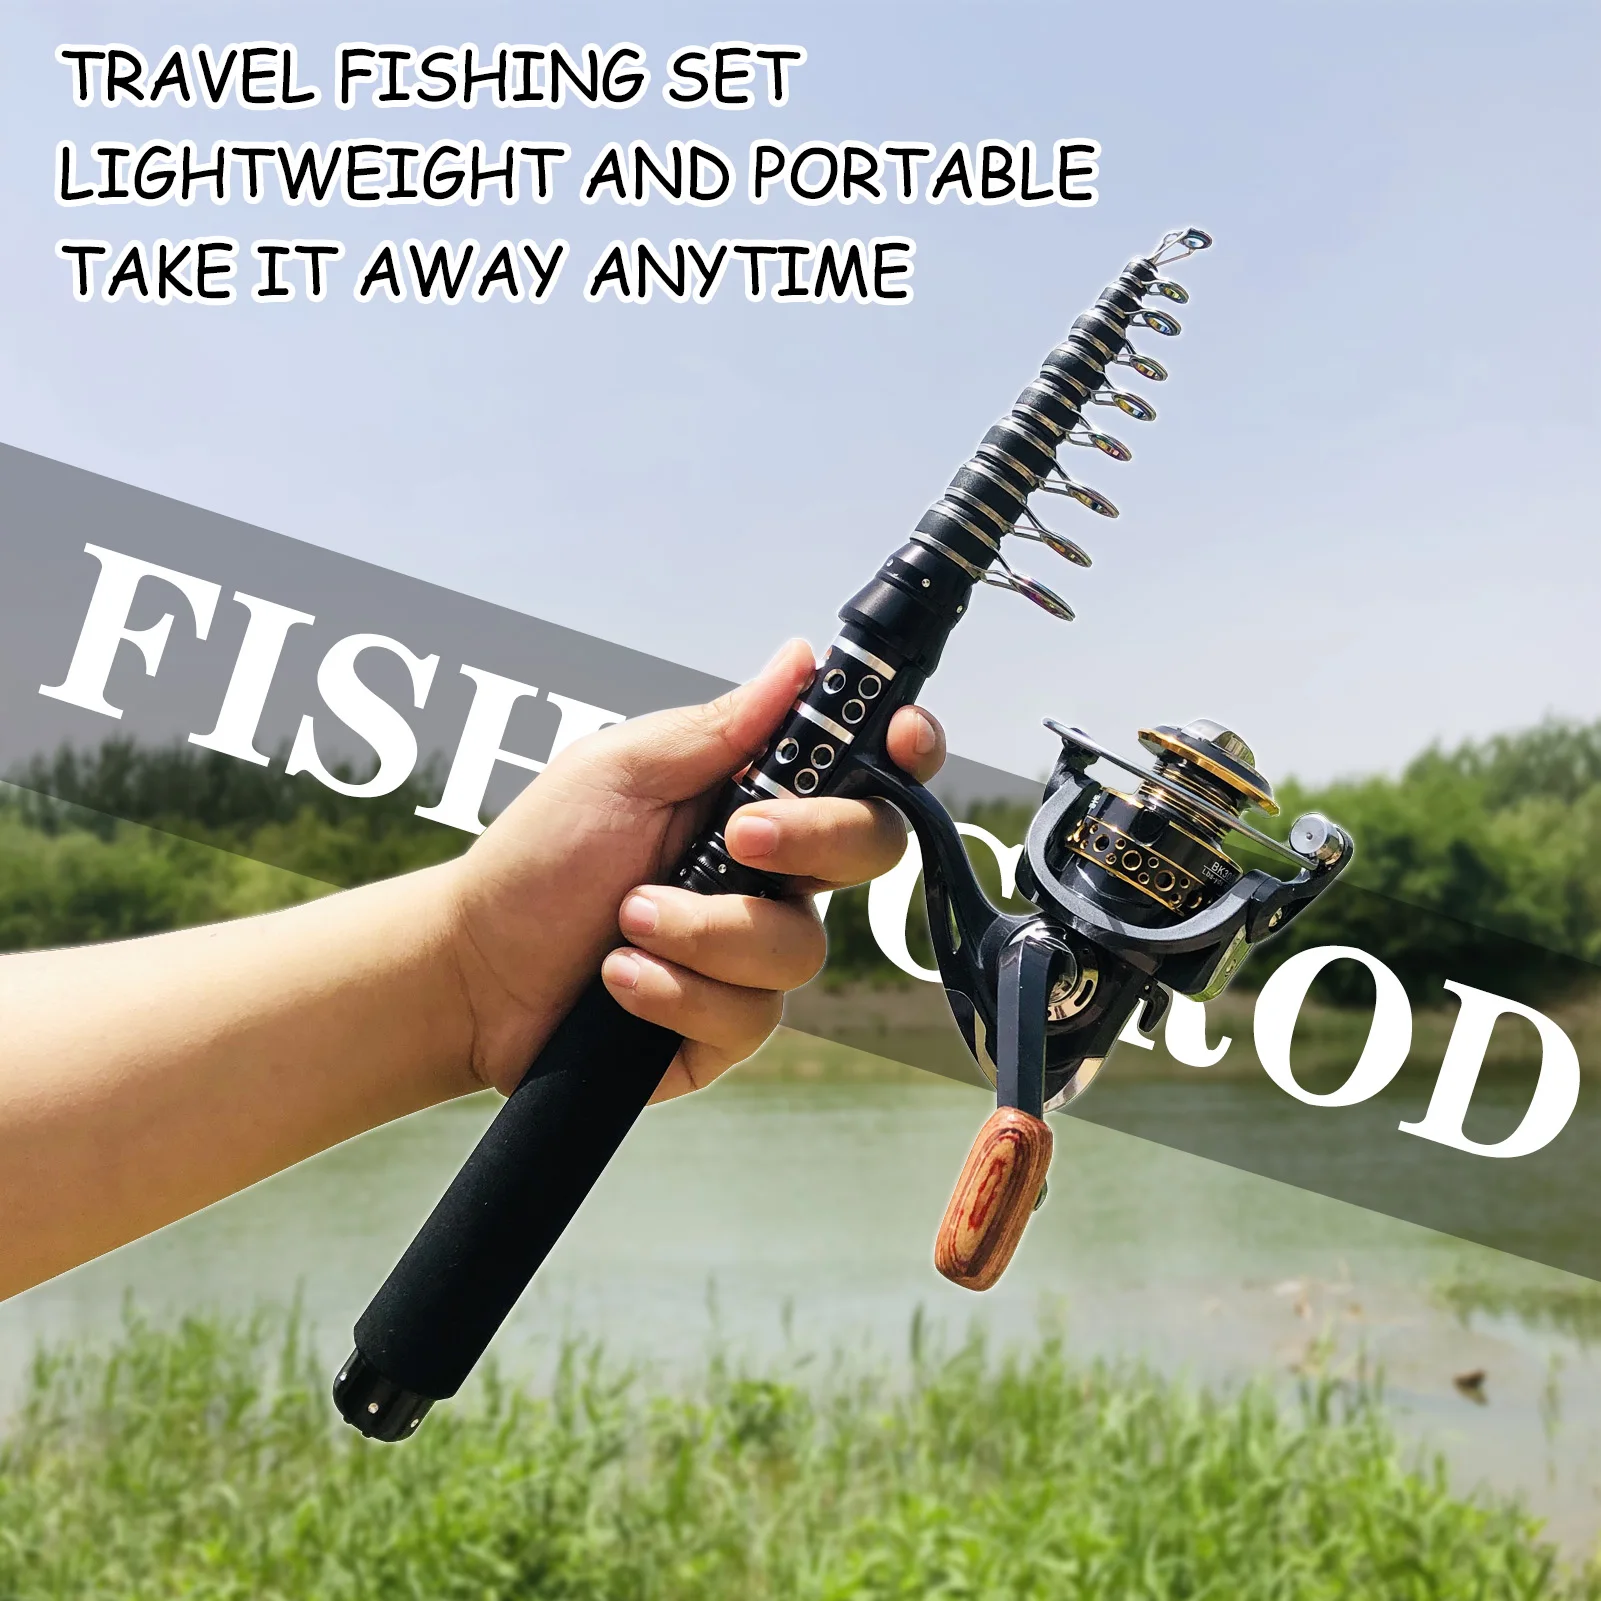 NEW 1.5M-3.0M High Quality Rod Reel Combos Super short Pocket fishing rod  telescopic Carbon Spinning Rod Travel Fishing Tackle